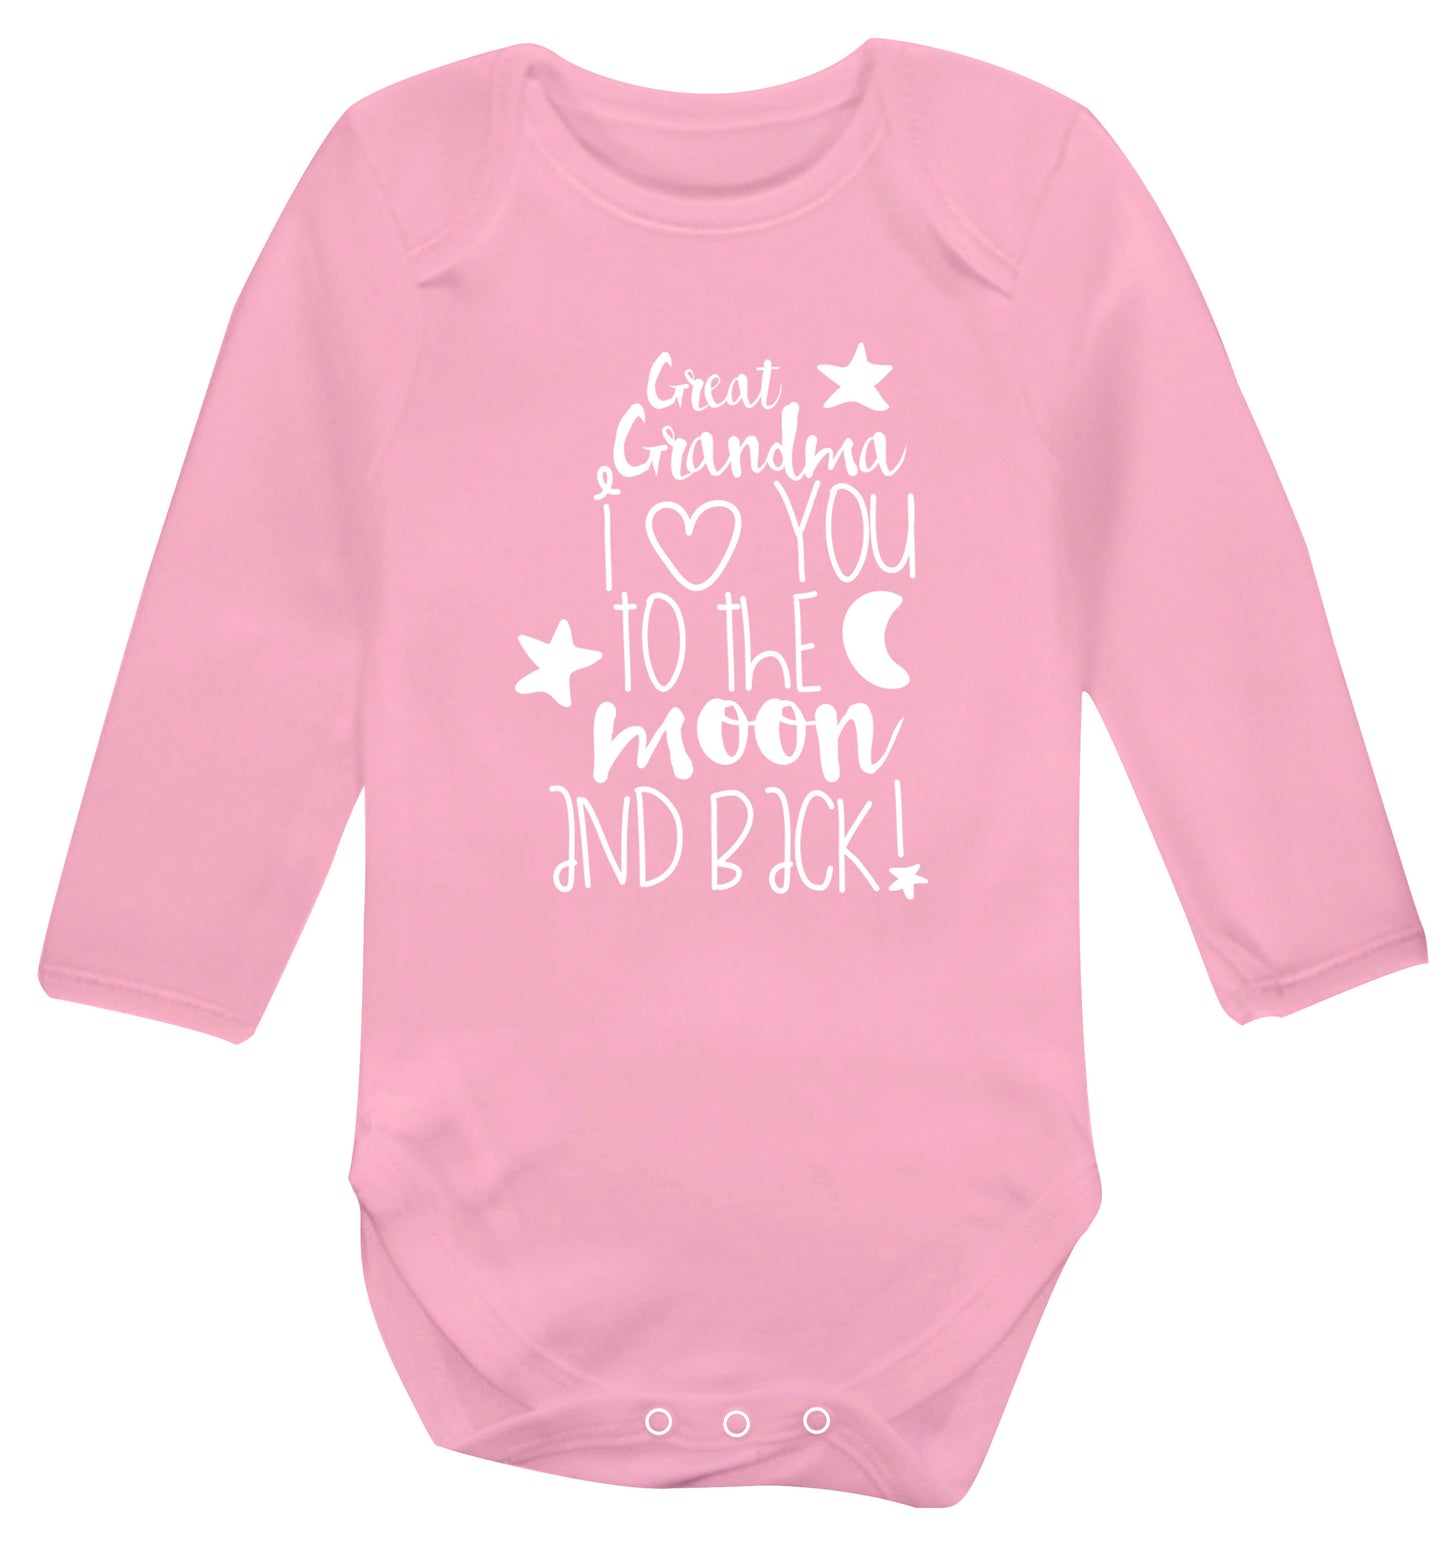 Great Grandma I love you to the moon and back Baby Vest long sleeved pale pink 6-12 months